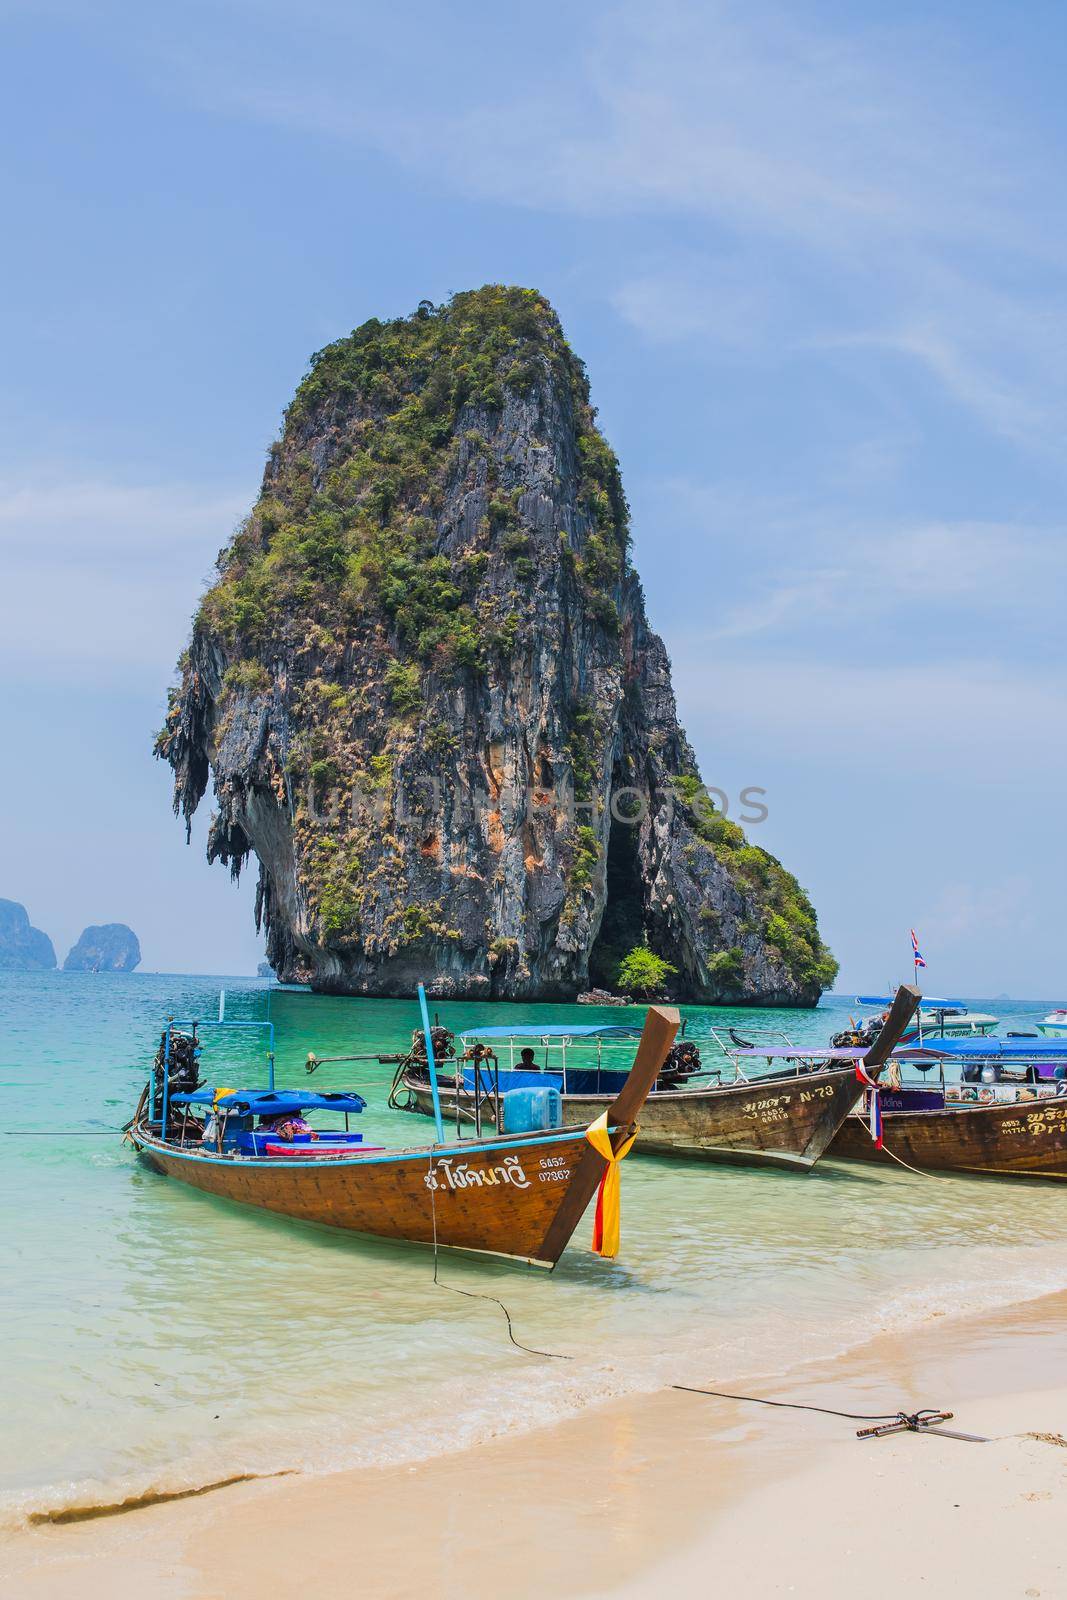 MAYA BAY, THAILAND - APRIL 14, 2014: Dramatic karst geography stands tall above traditional Thai longtail boats docked in the popular Maya Bay. by Wmpix